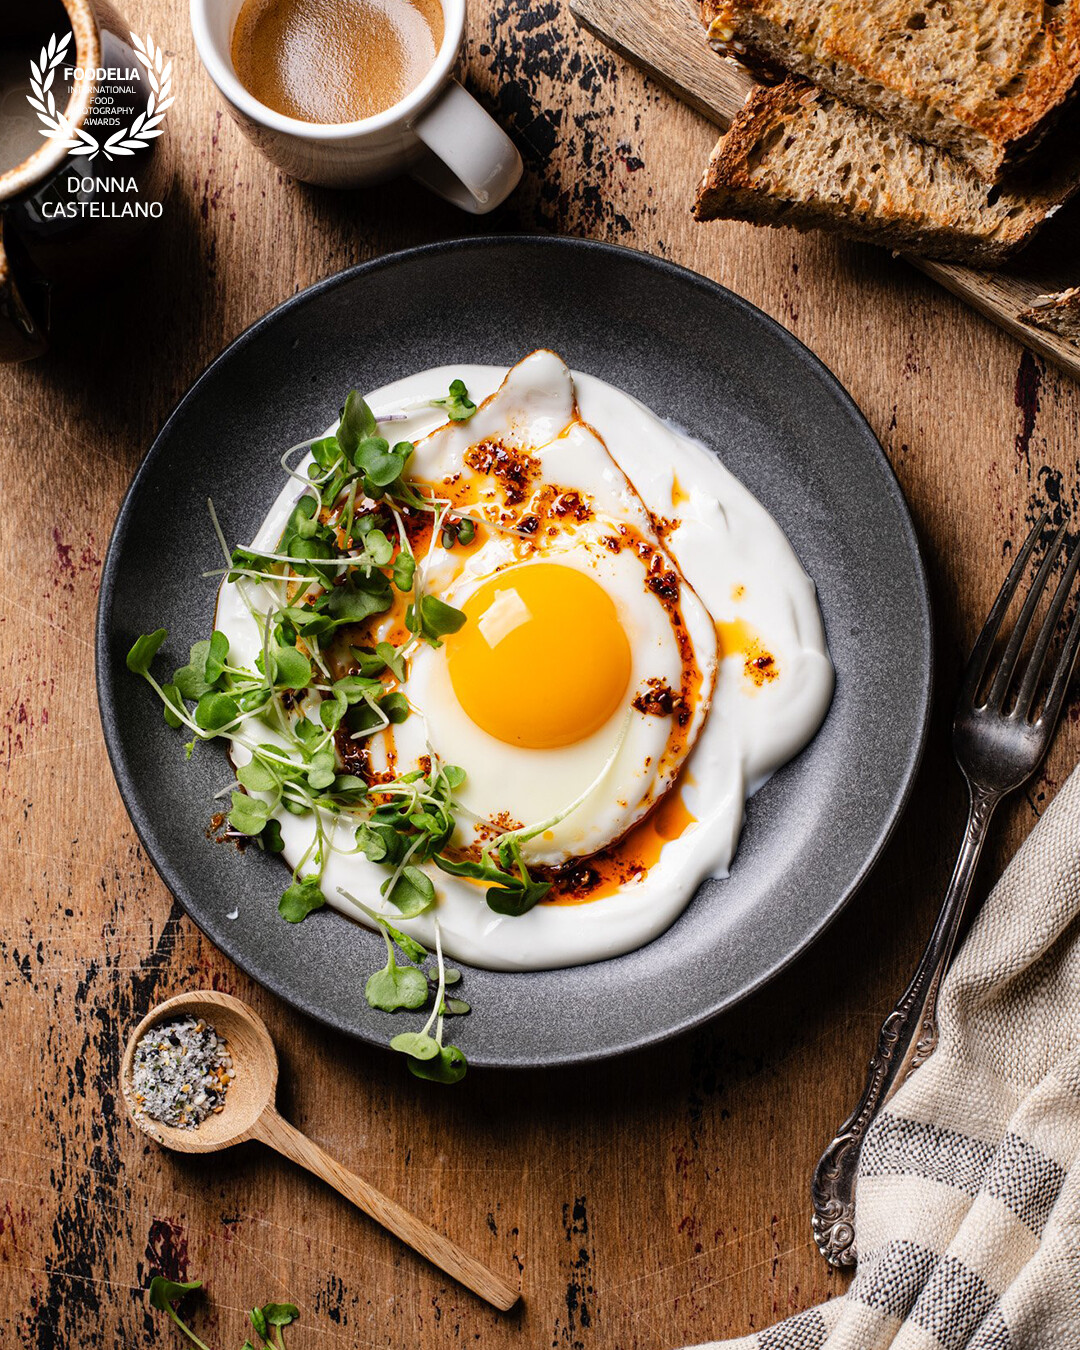 My version of Turkish Eggs is an easy breakfast made with the special addition of a delicious black garlic finishing salt.